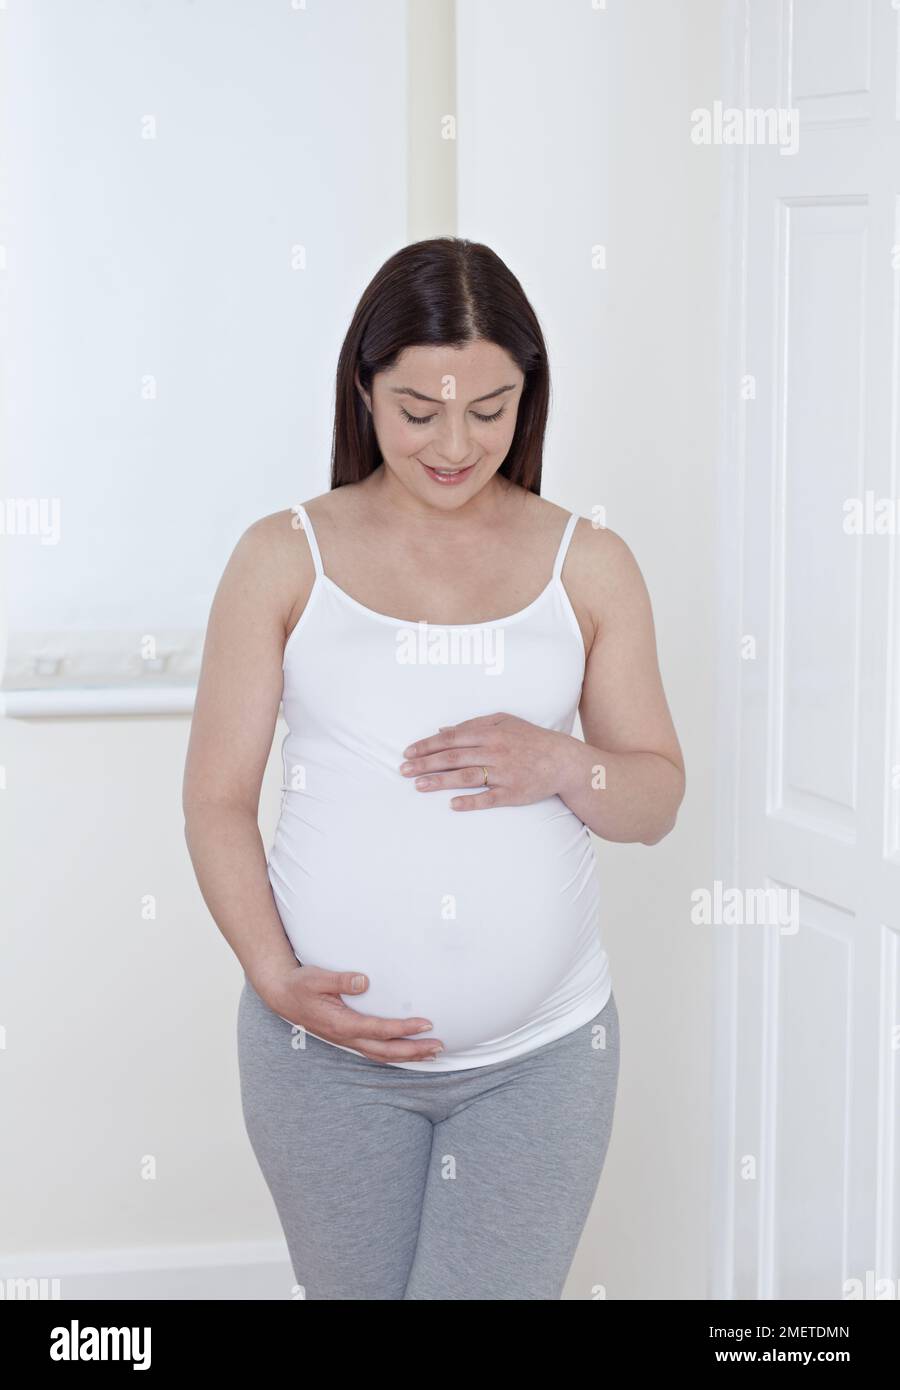 Pregnant woman holding her belly Stock Photo